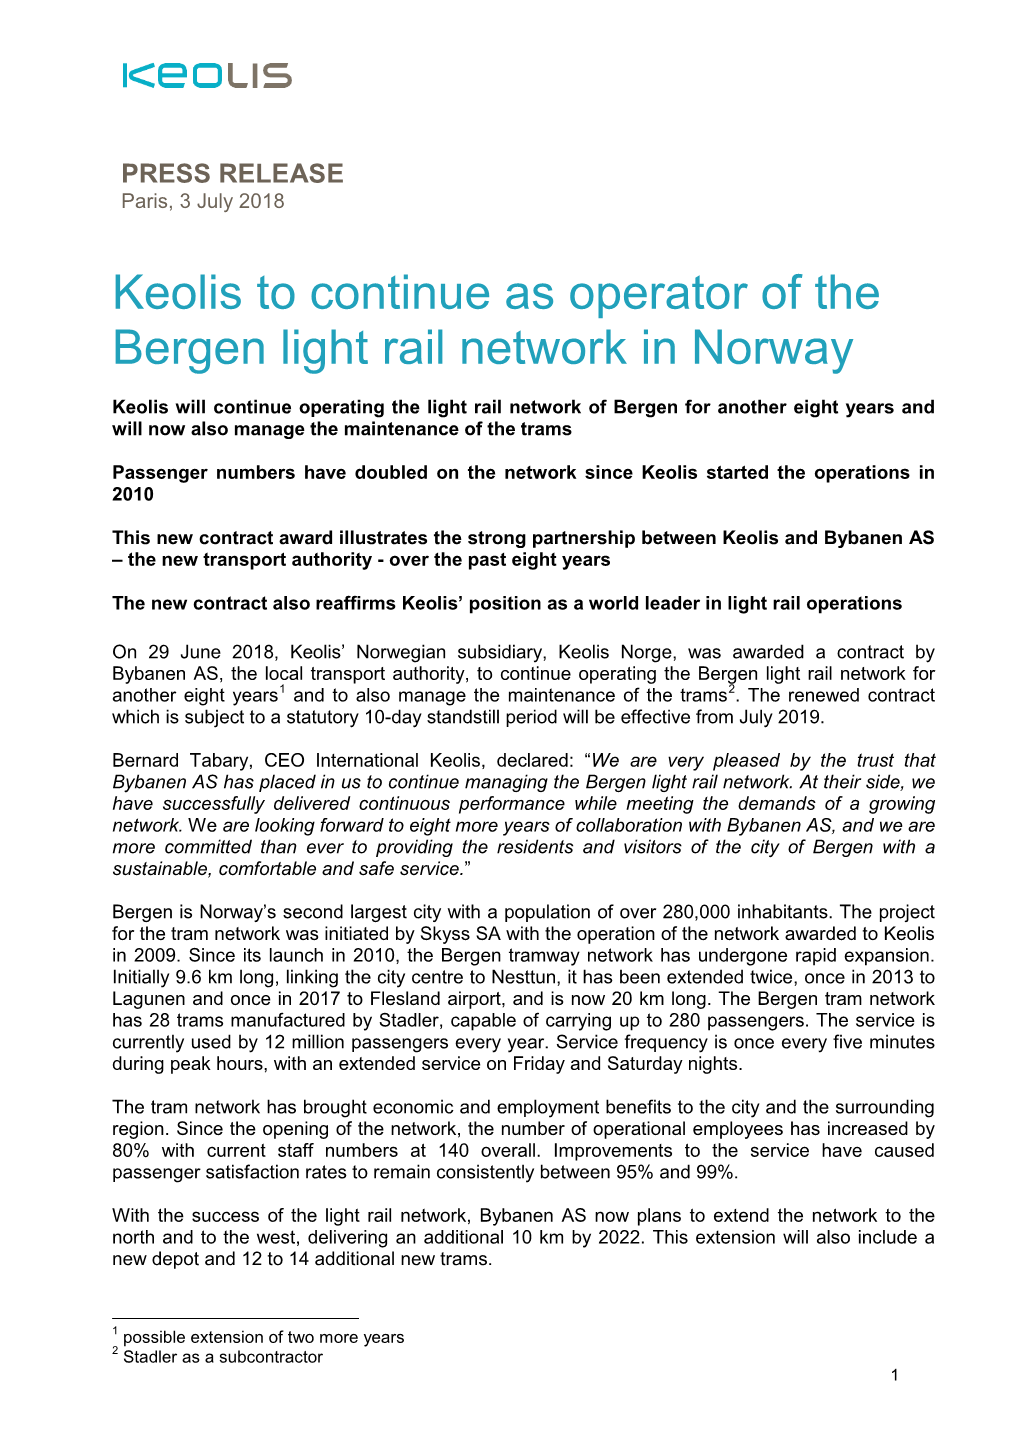 Keolis to Continue As Operator of the Bergen Light Rail Network in Norway